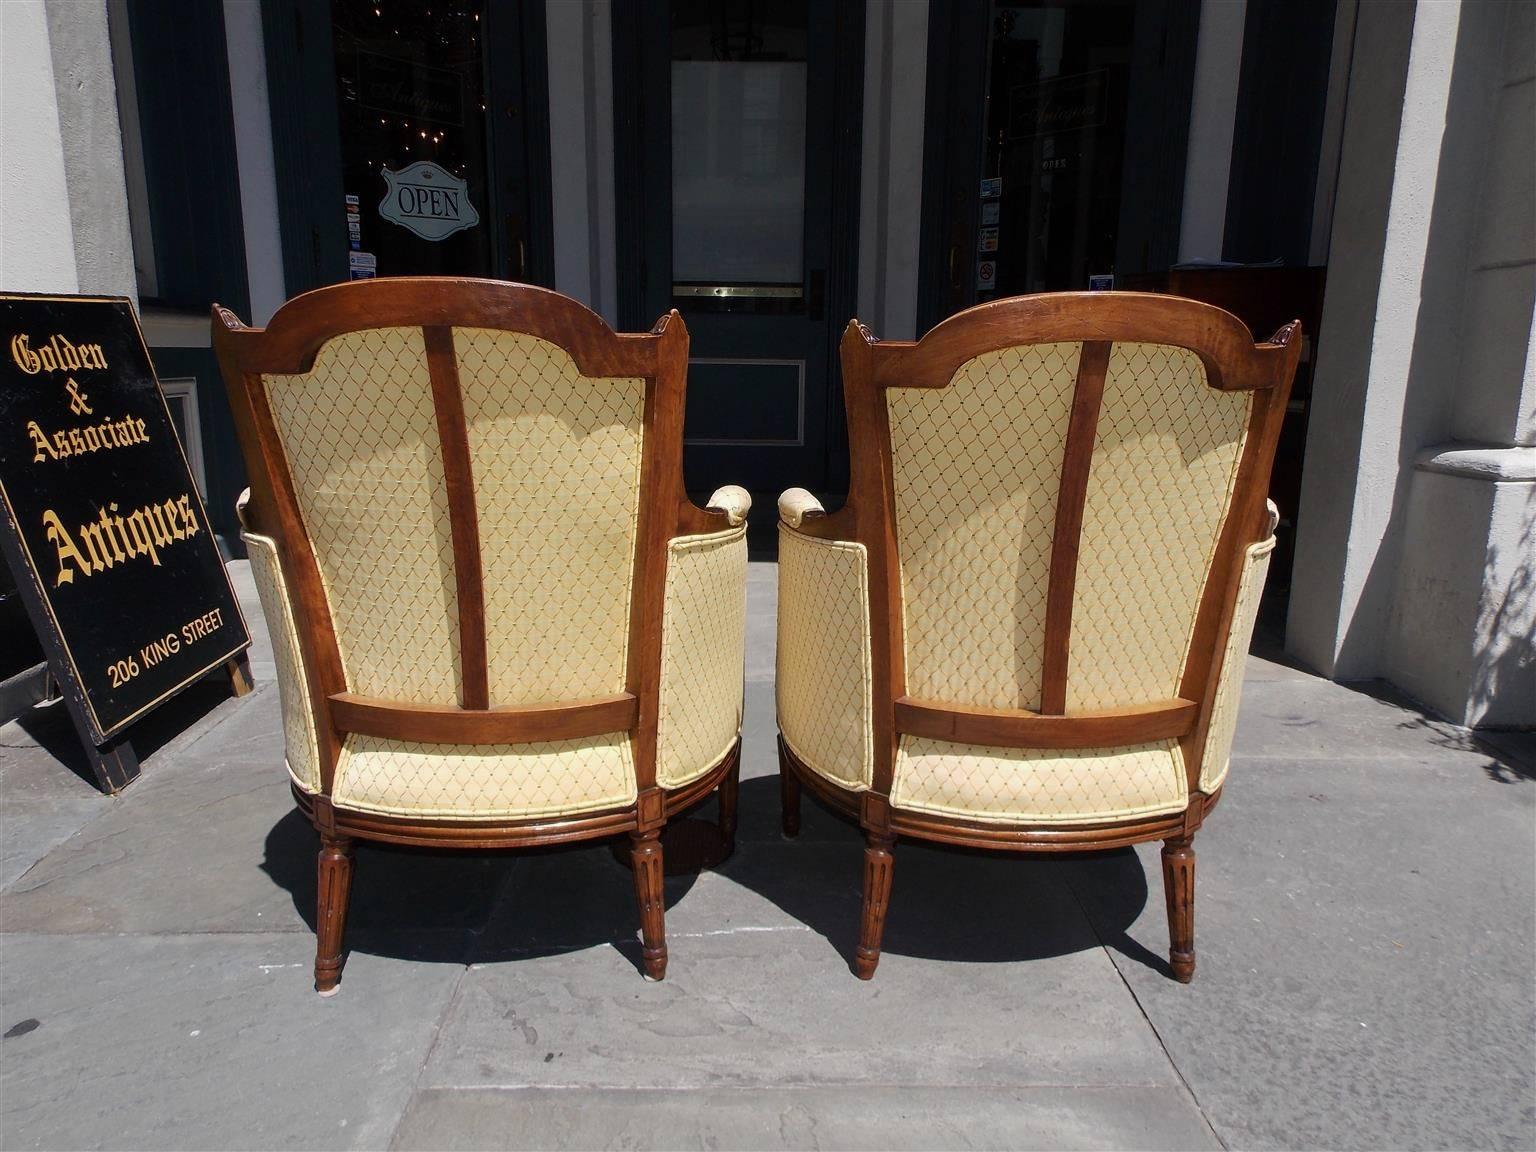 Pair of Italian Walnut Bergere Upholstered Armchairs, Circa 1780 For Sale 2